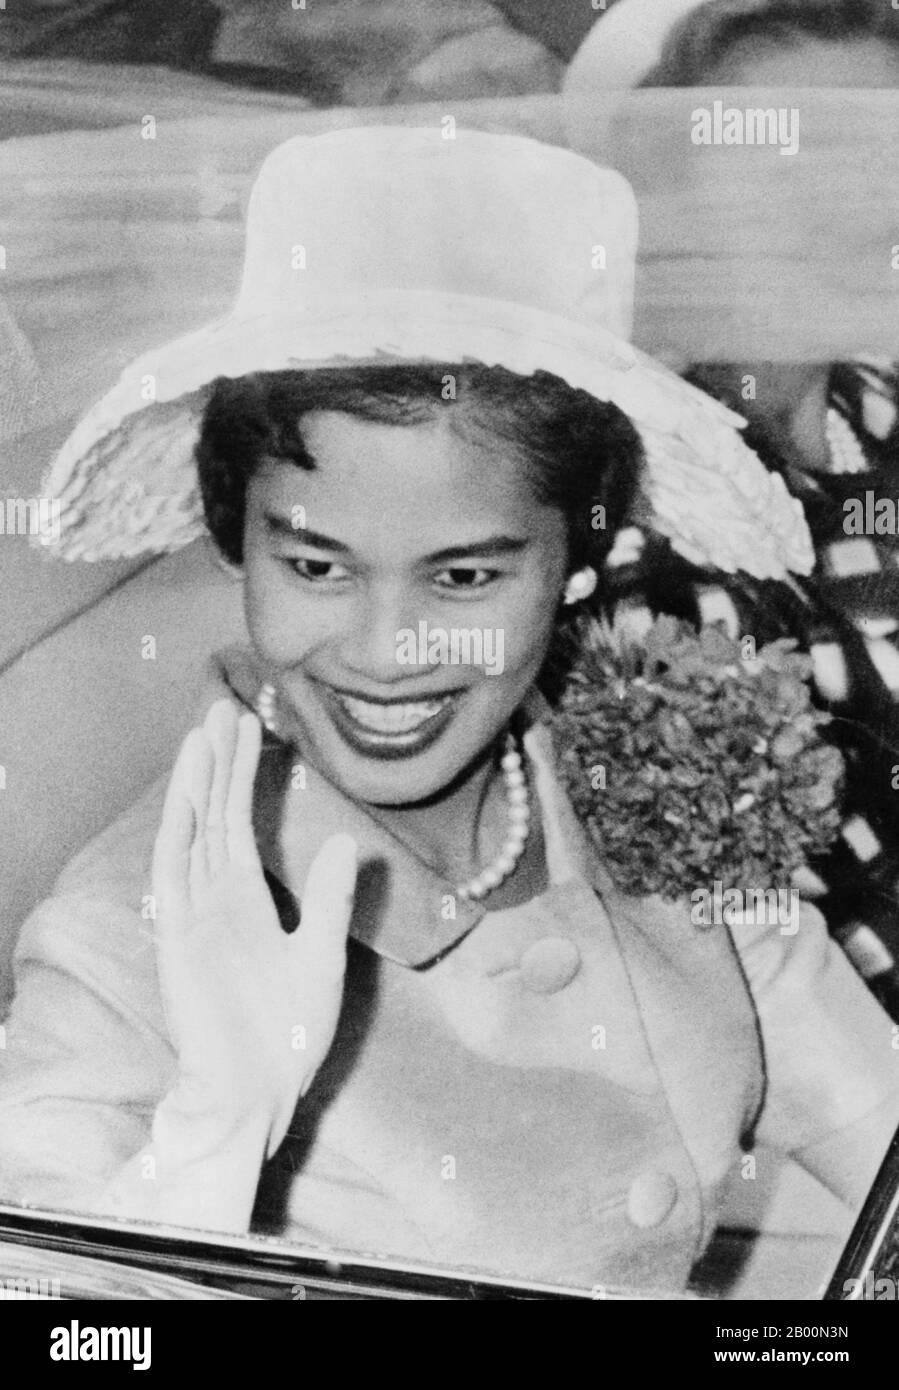 Thailand: Queen Sirikit during a parade in New York City, July 1960.  Somdet Phra Nang Chao Sirikit Phra Borommarachininat  (‘Her Majesty Queen Regent Sirikit’), born Mom Rajawongse Sirikit Kitiyakara on August 12, 1932, is the queen consort of Bhumibol Adulyadej (Rama IX), King of Thailand. She is the second Queen Regent of Thailand (the first Queen Regent was Queen Saovabha Bongsri of Siam, later Queen Sri Patcharindra, the queen mother). As the consort of the king who currently is the world's longest reigning head of state, she is also the world's longest serving consort of a monarch. Stock Photo